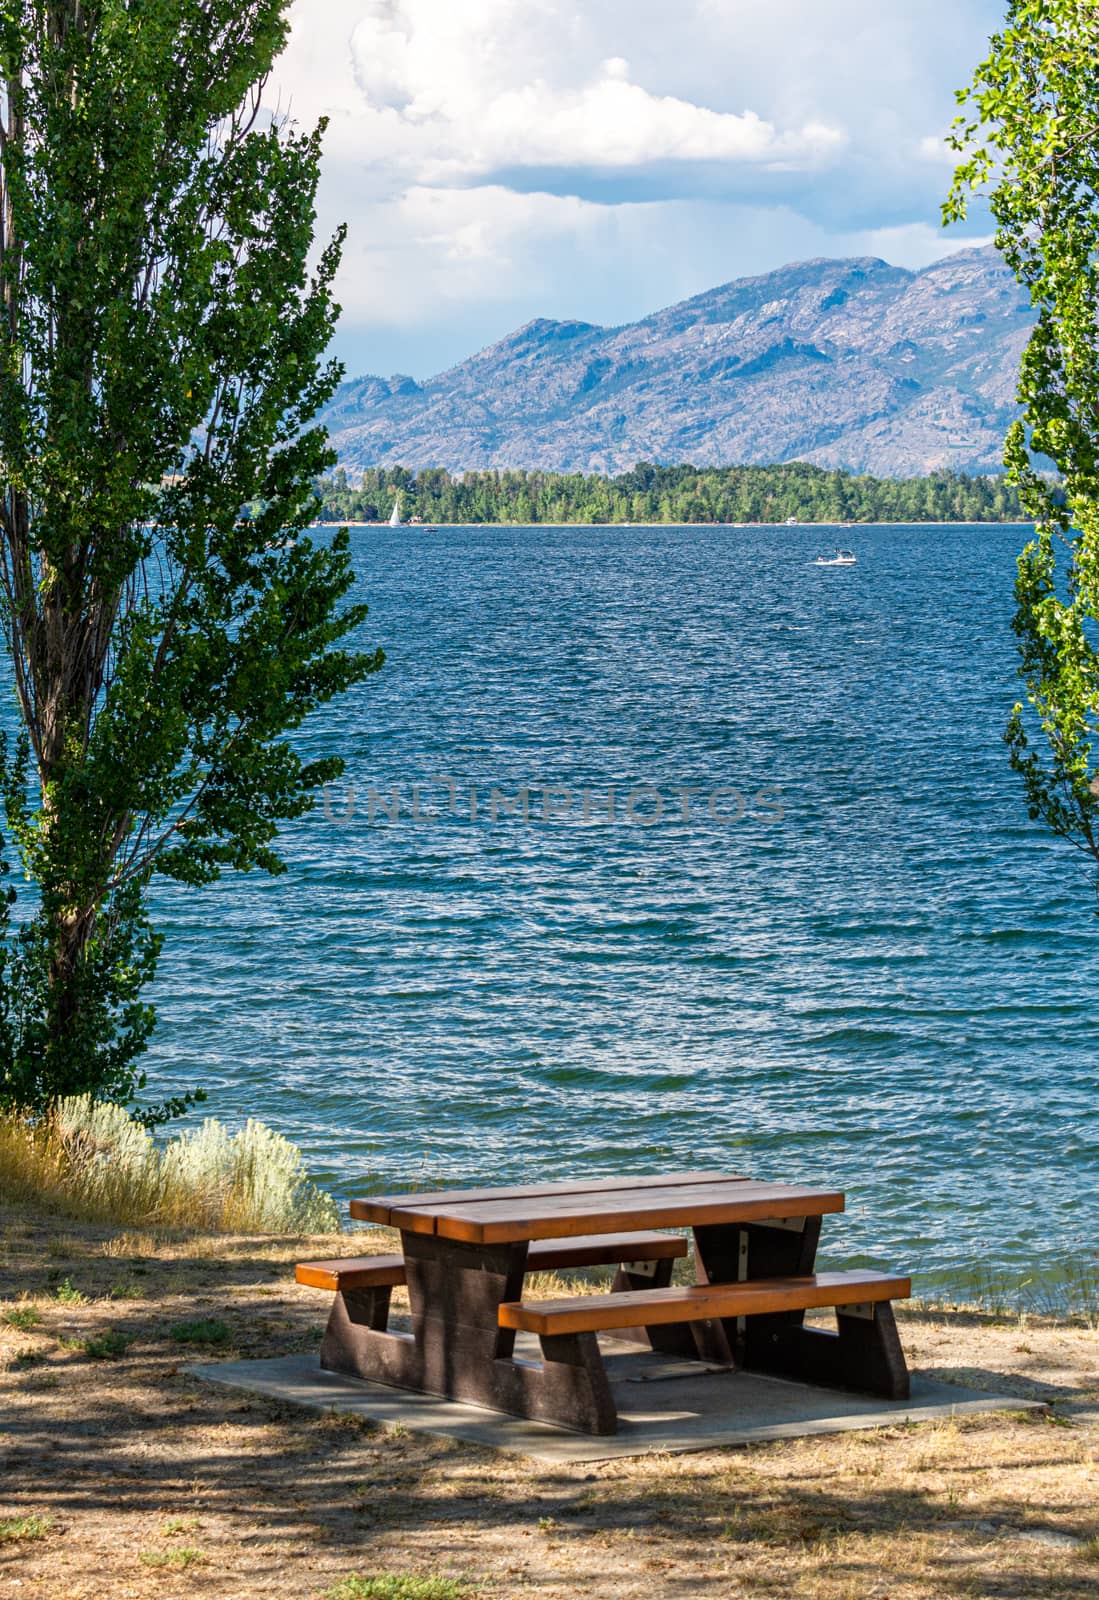 Recreation area with beautiful overview of the lake and mountains